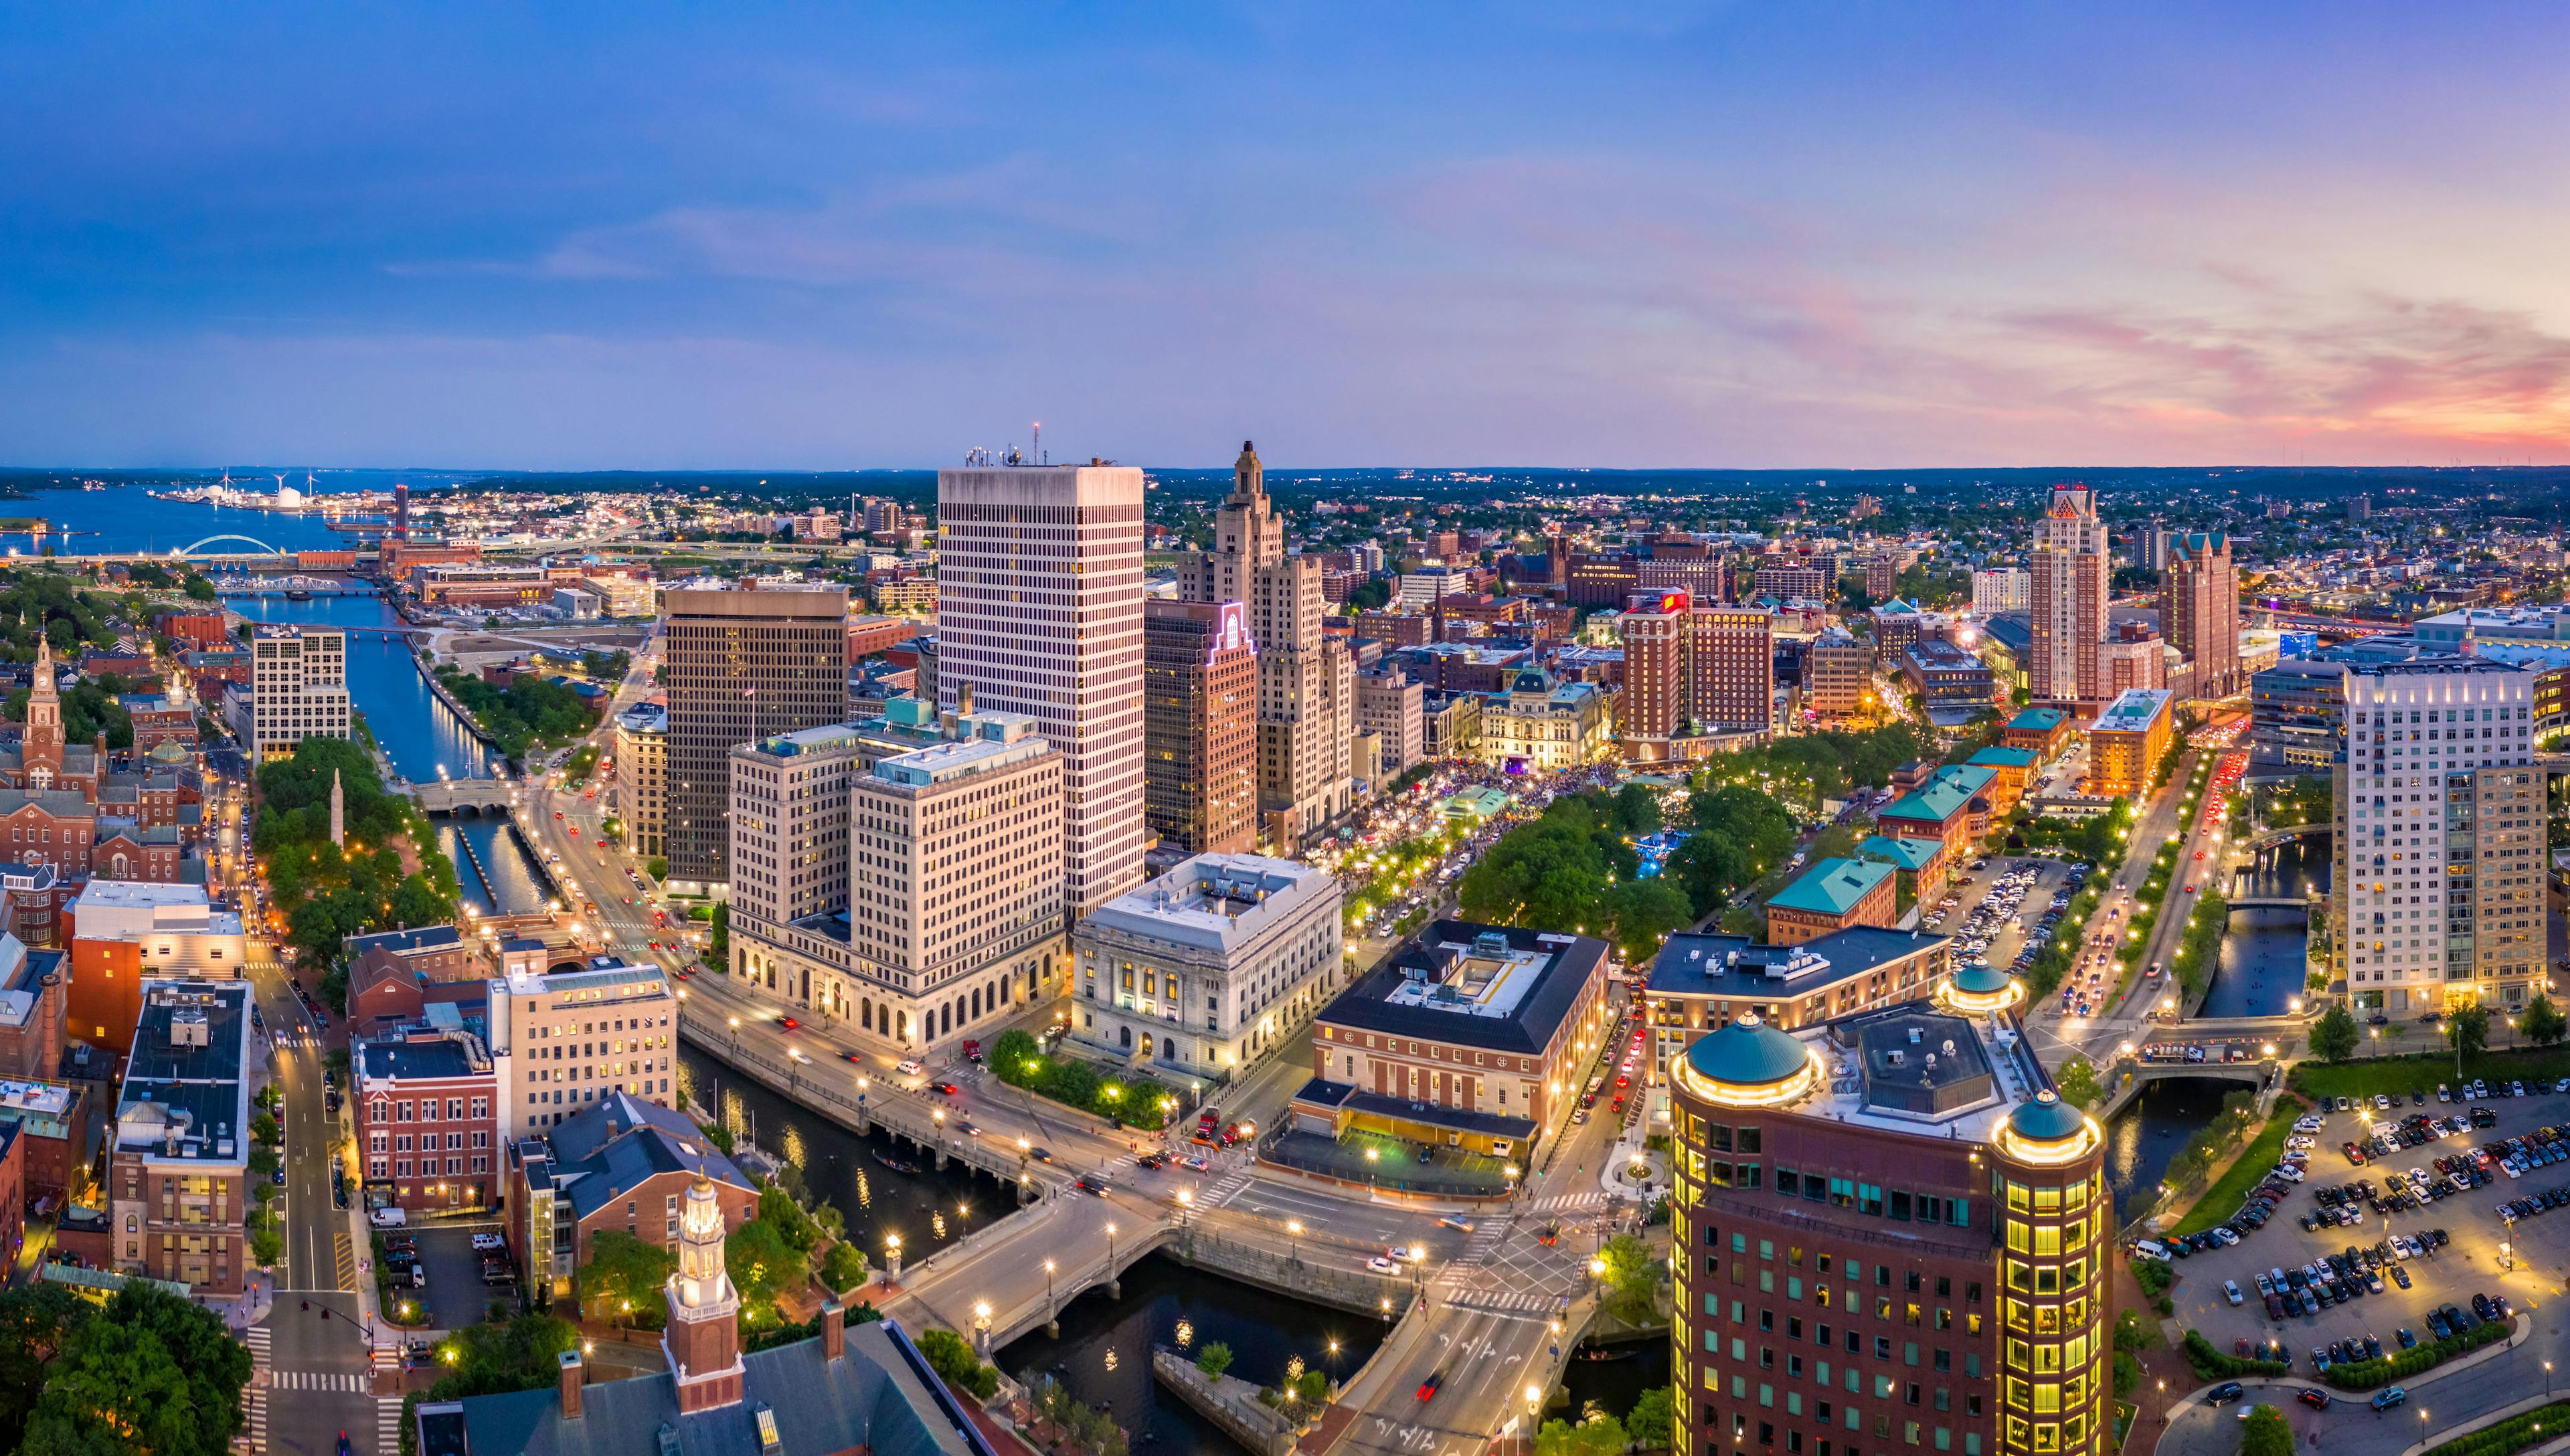 Aerial panorama of Providence skyline at dusk. Providence is the capital city of the U.S. state of Rhode Island. Founded in 1636 is one of the oldest cities in USA. | Image Credit: © mandritoiu - stock.adobe.com